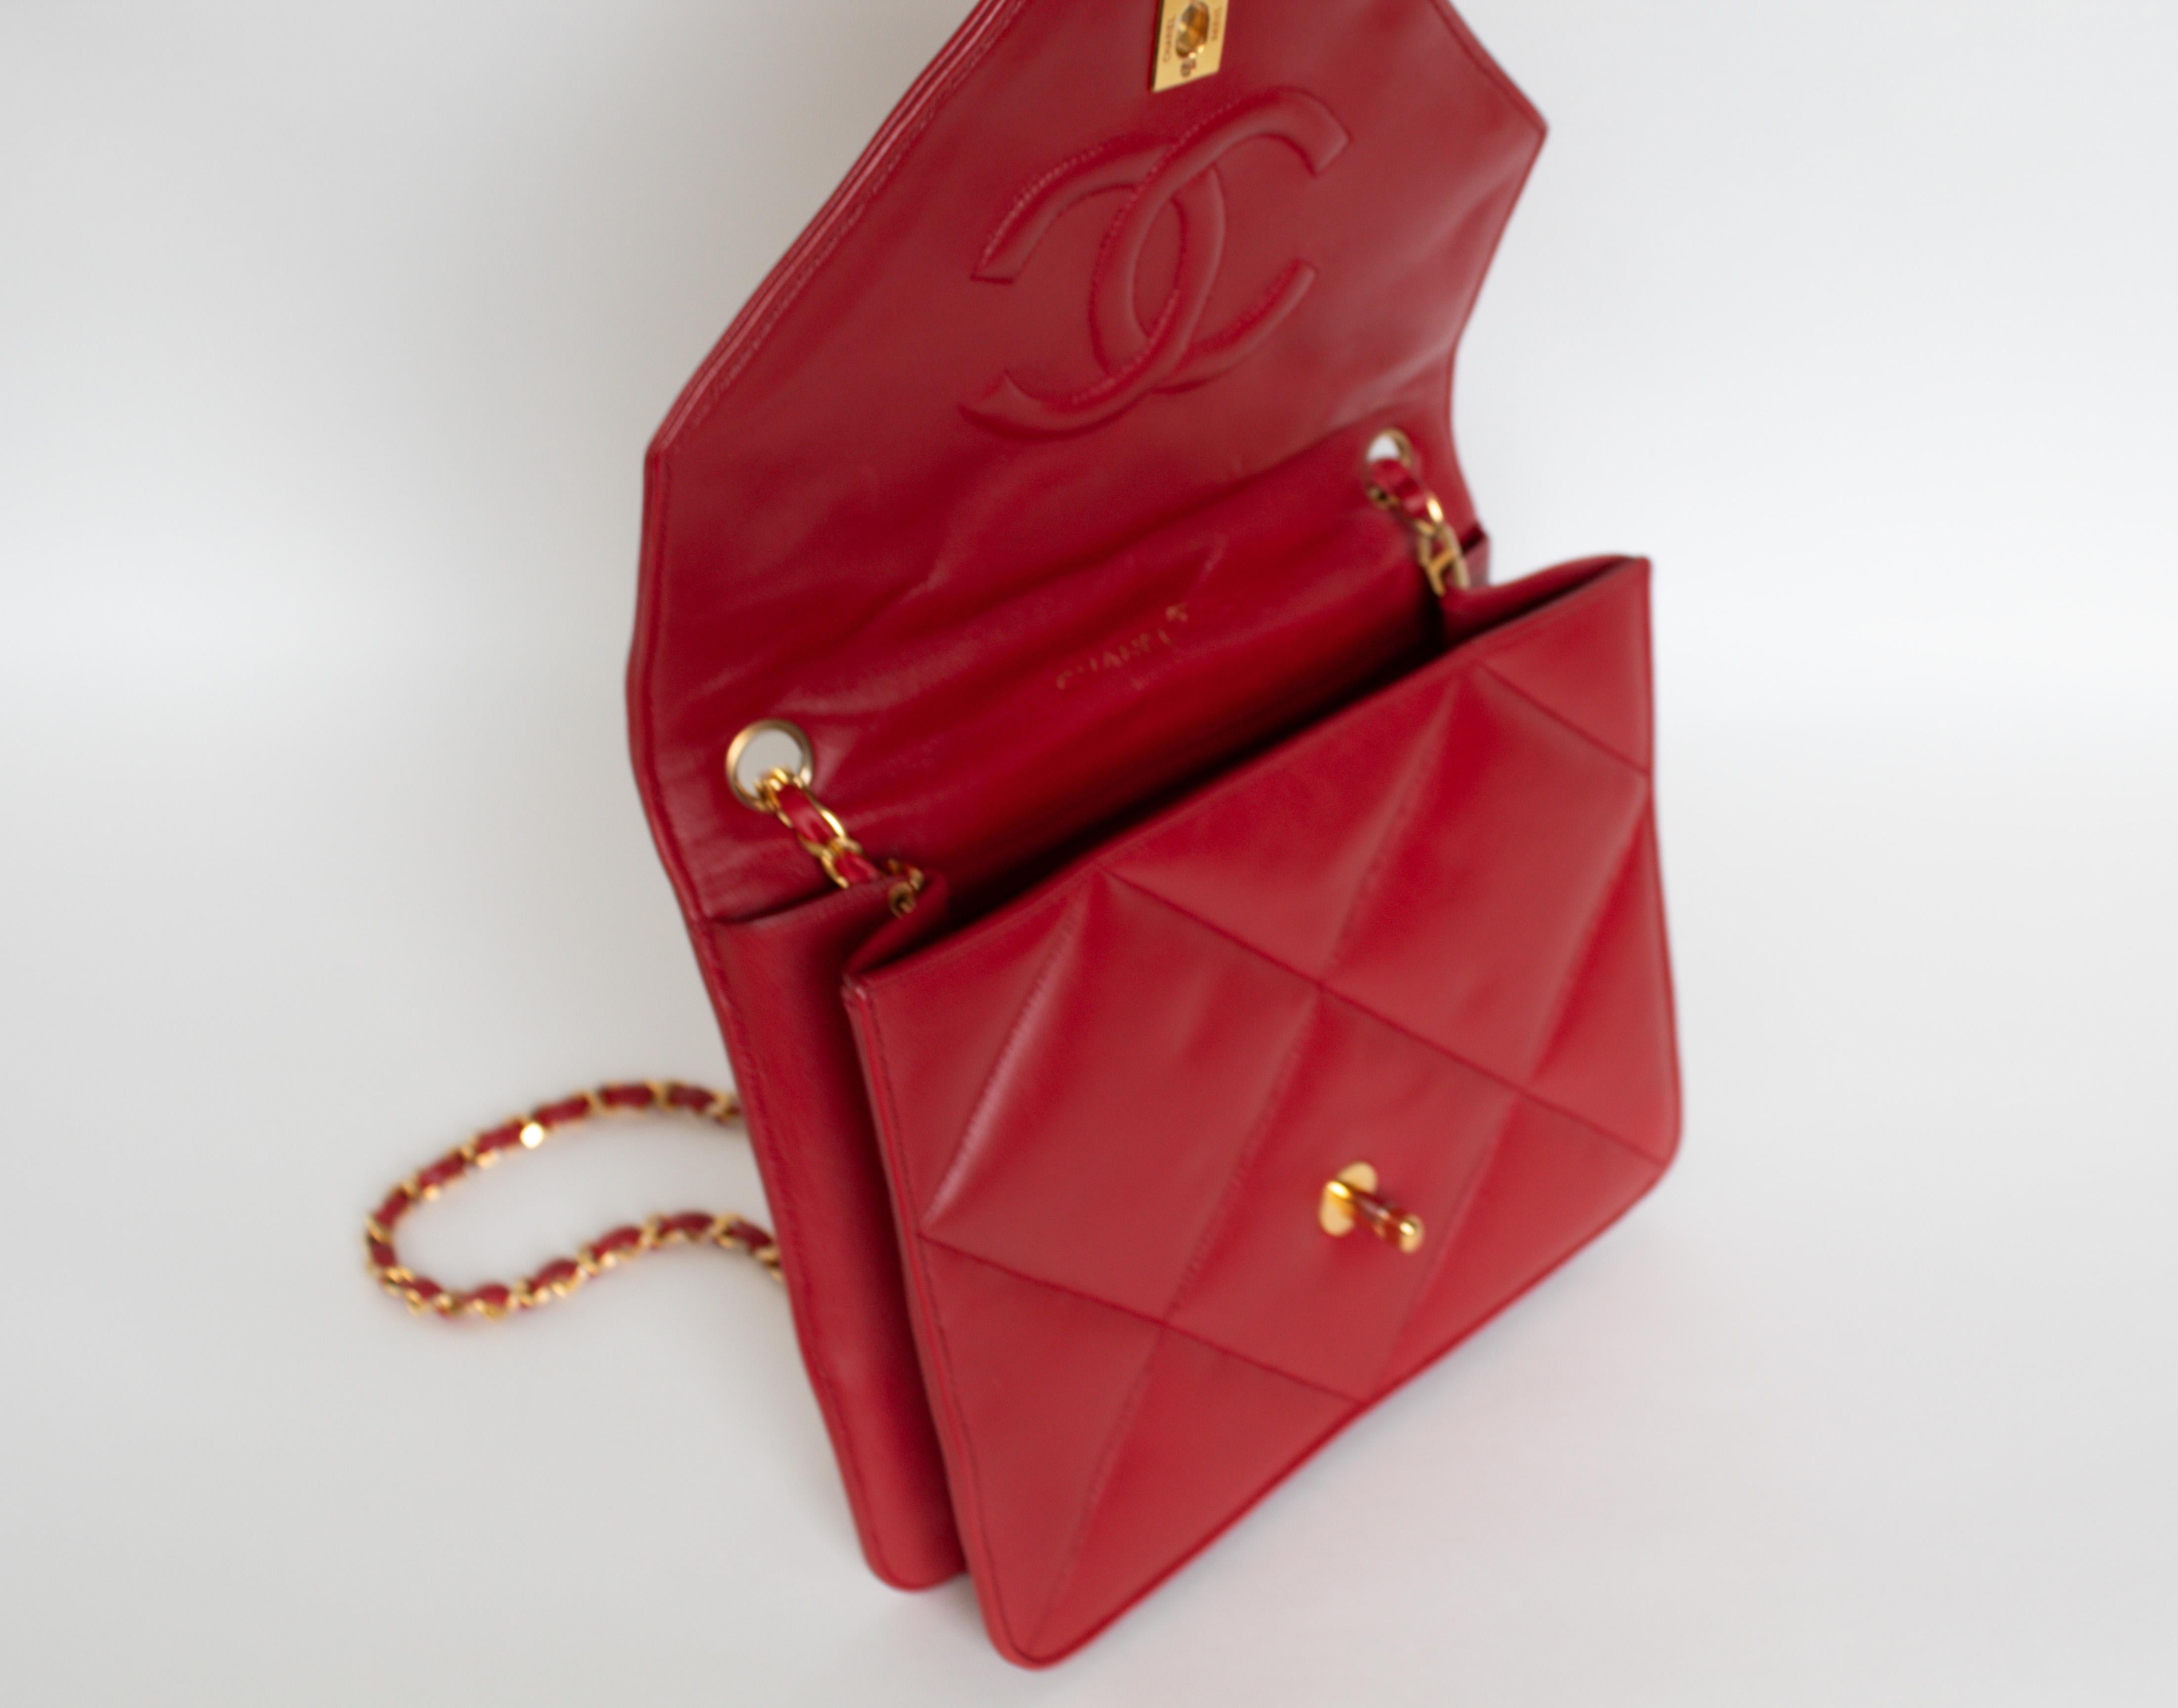 Classic Chanel 19 Vintage Rare 90s Jumbo Lambskin Red Envelope Flap Bag  For Sale 5